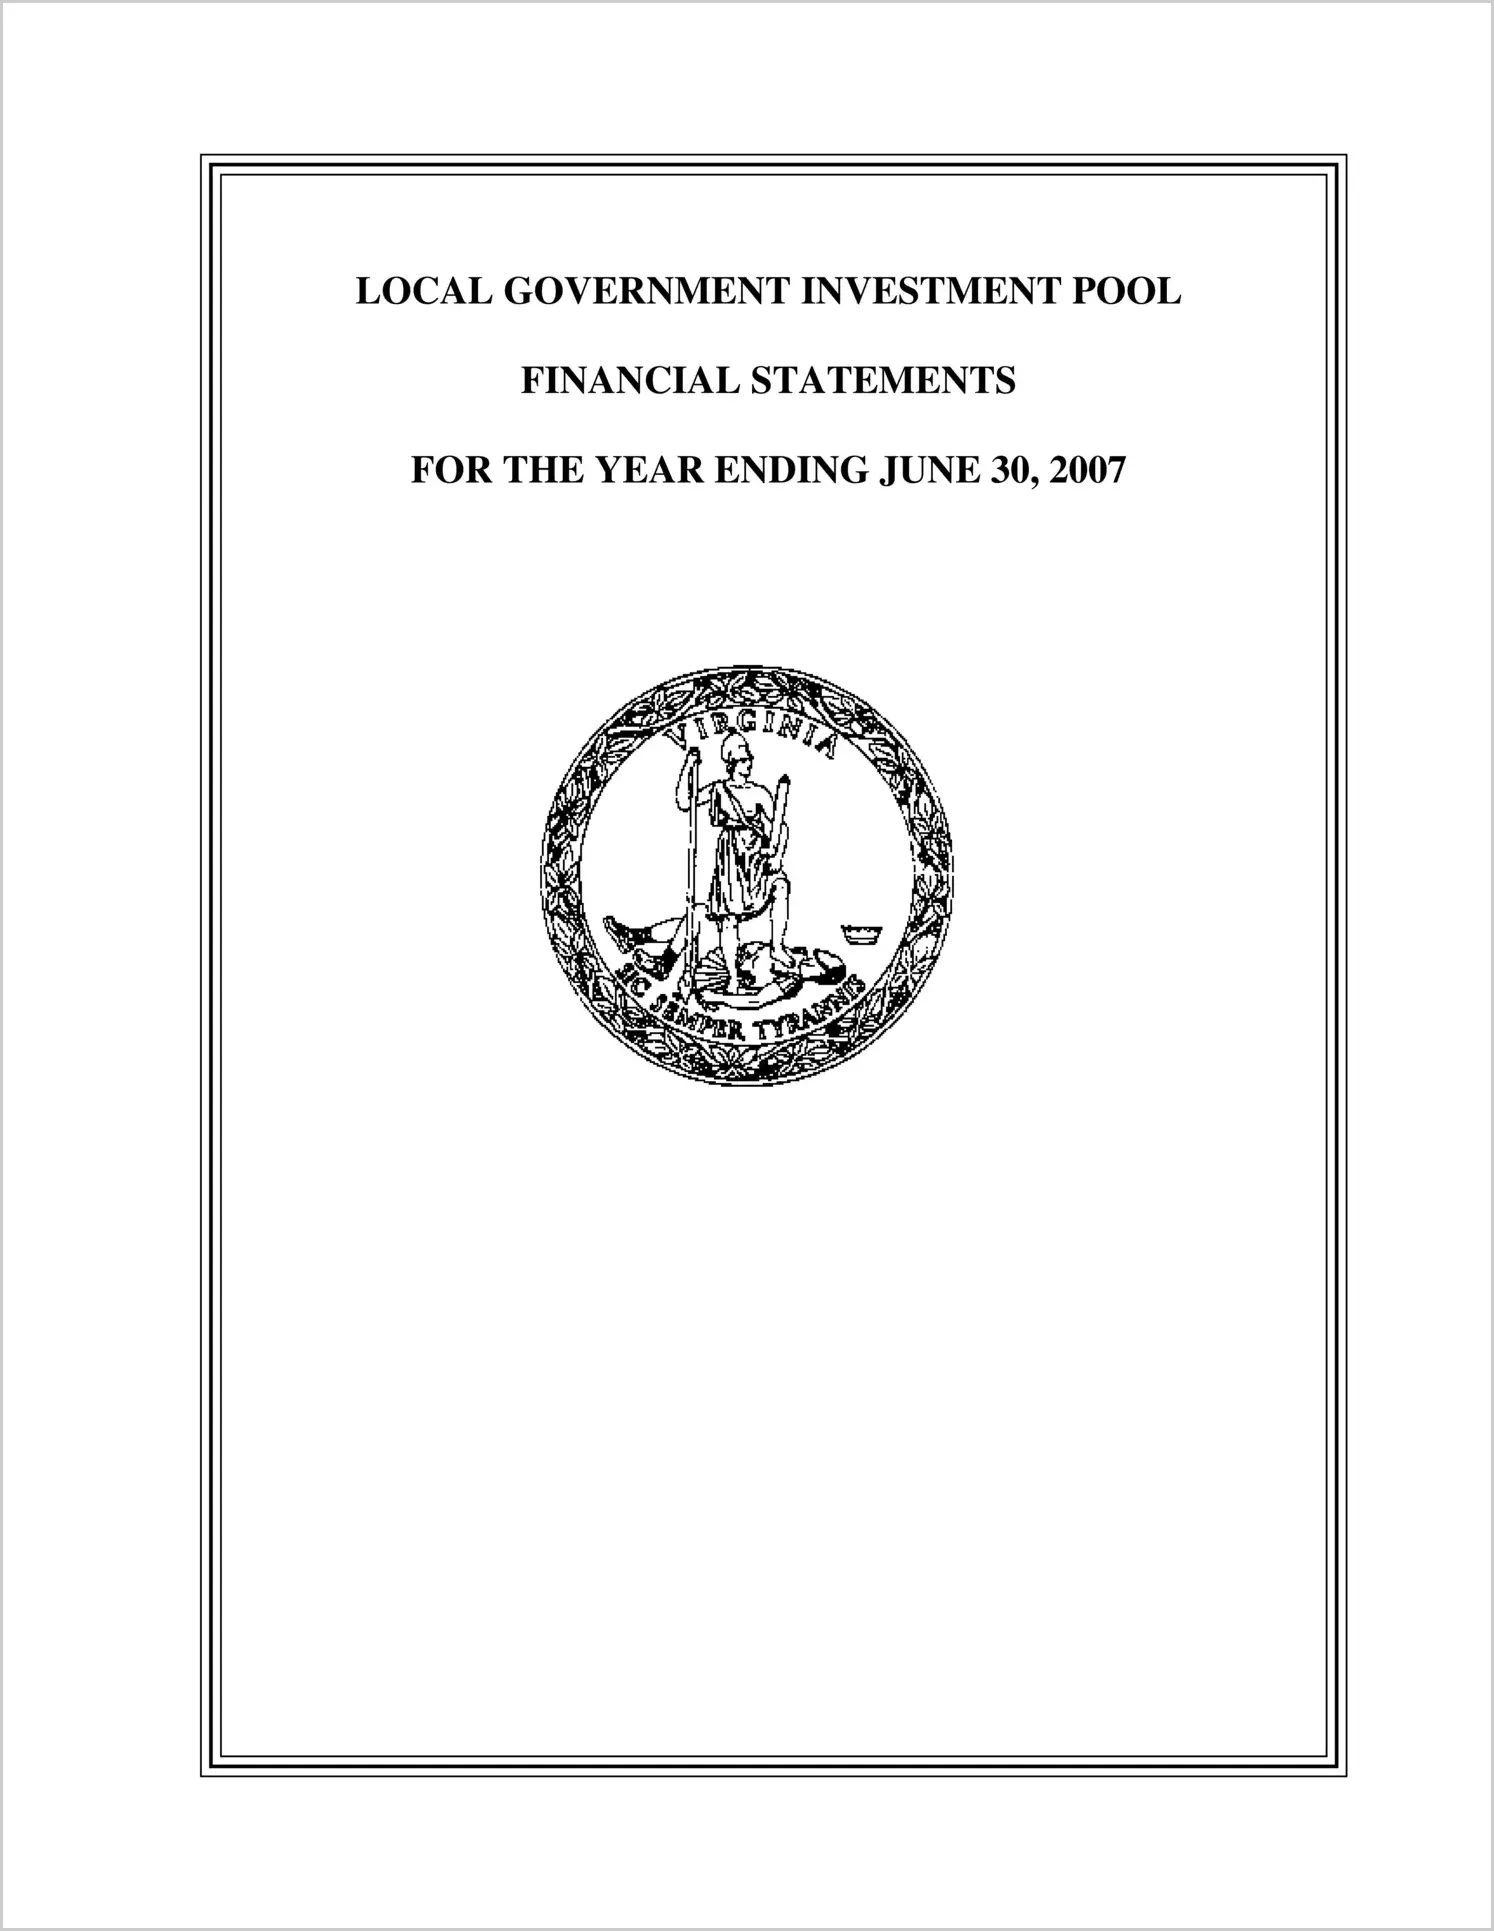 Local Government Investment Pool Financial Statements for the year ended June 30, 2007